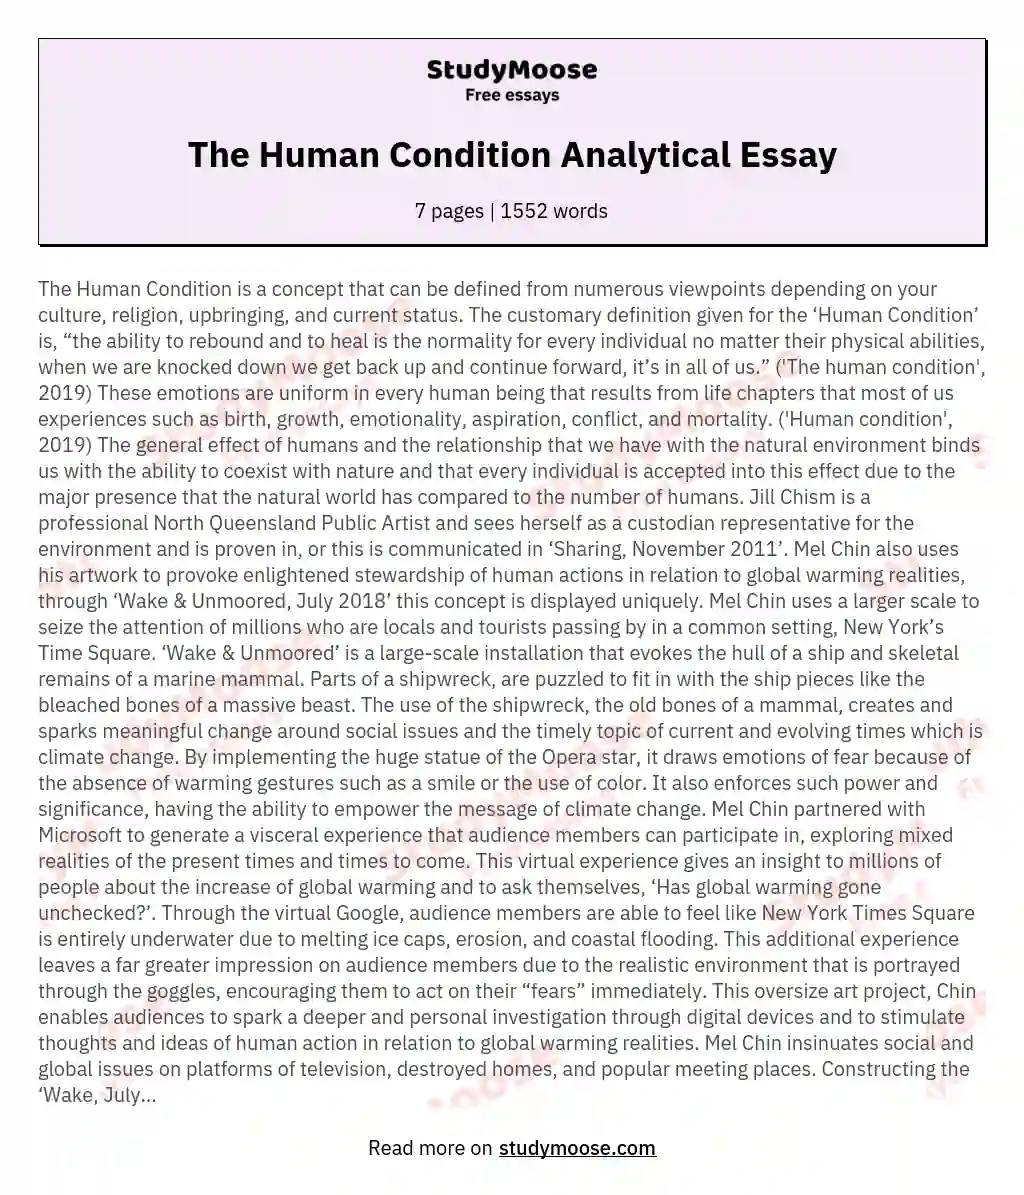 The Human Condition Analytical Essay essay